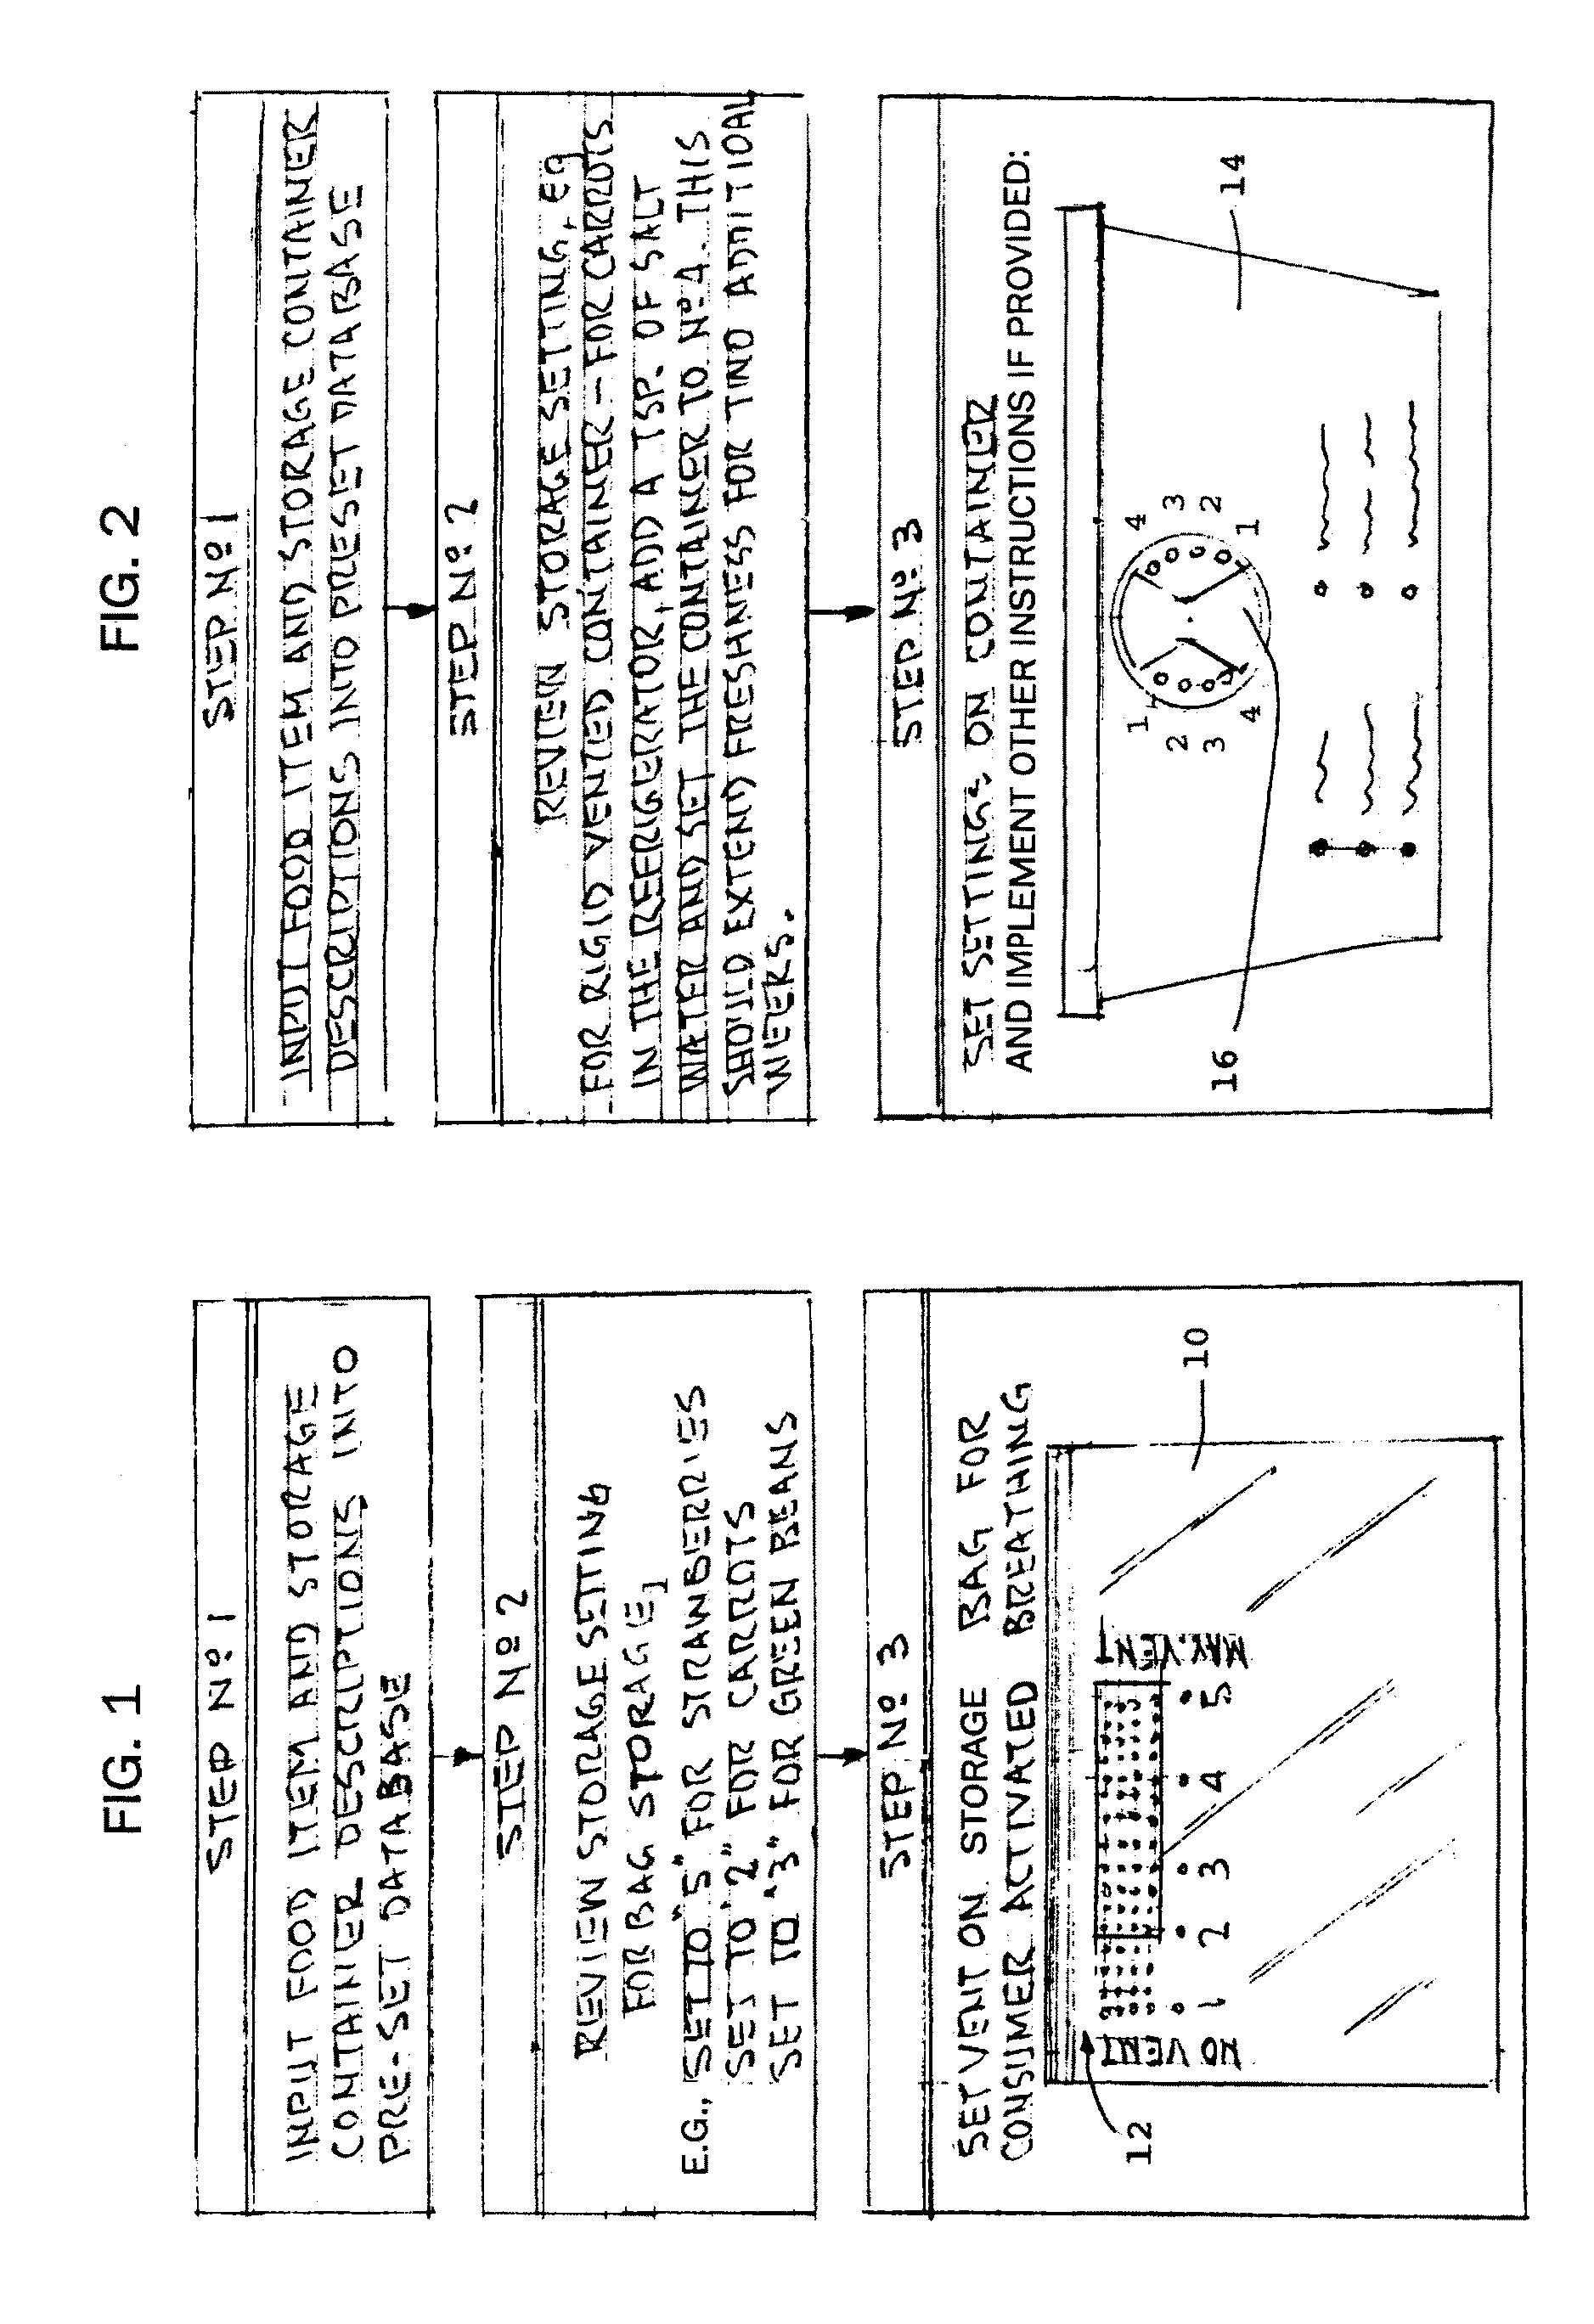 Method for computer evaluation of containers and food to obtain optimum storage and/or use